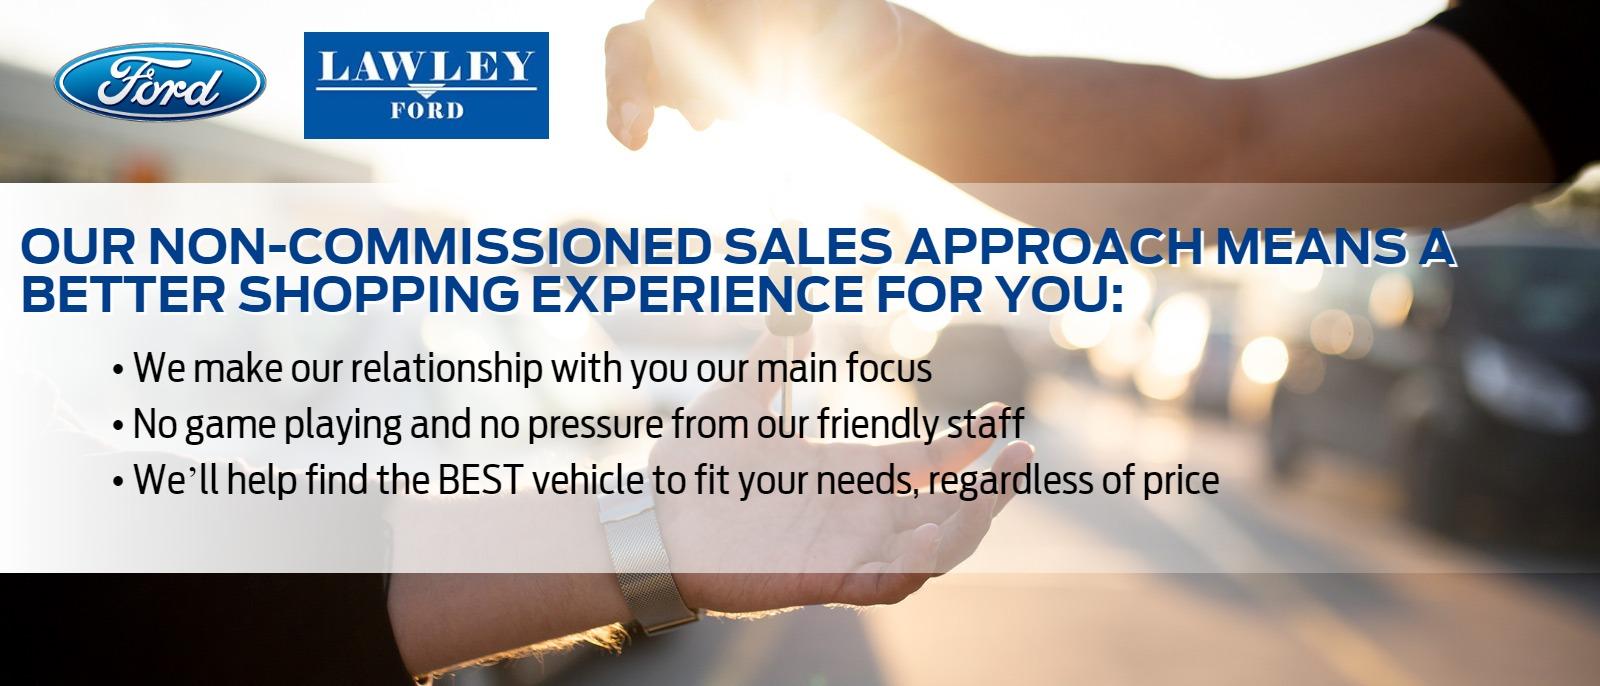 Our non-commissioned sales approach means a better shopping experience for you